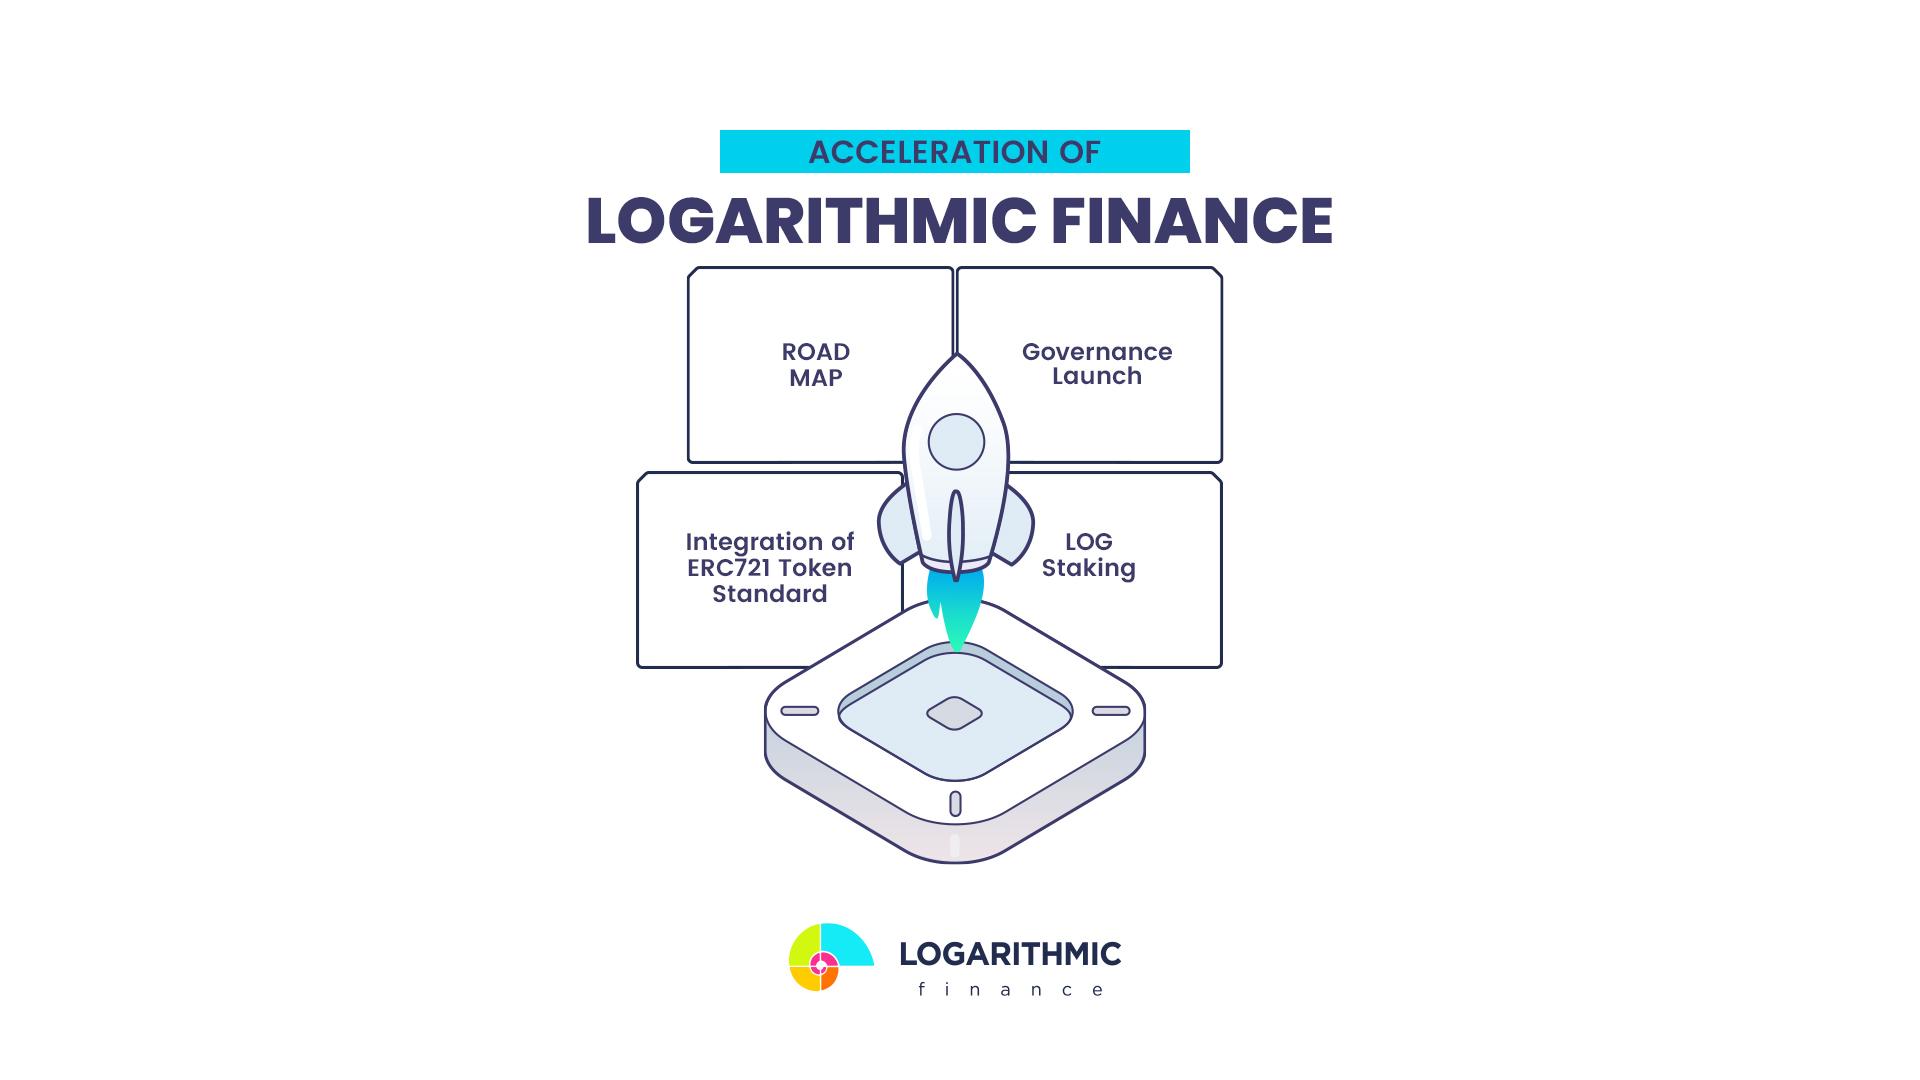 The Cryptocurrency List Is Expanding By the Day: Why Logarithmic Finance (LOG), Ripple (XRP), and Solana (SOL) Are Three Cryptocurrencies You Should Look Into